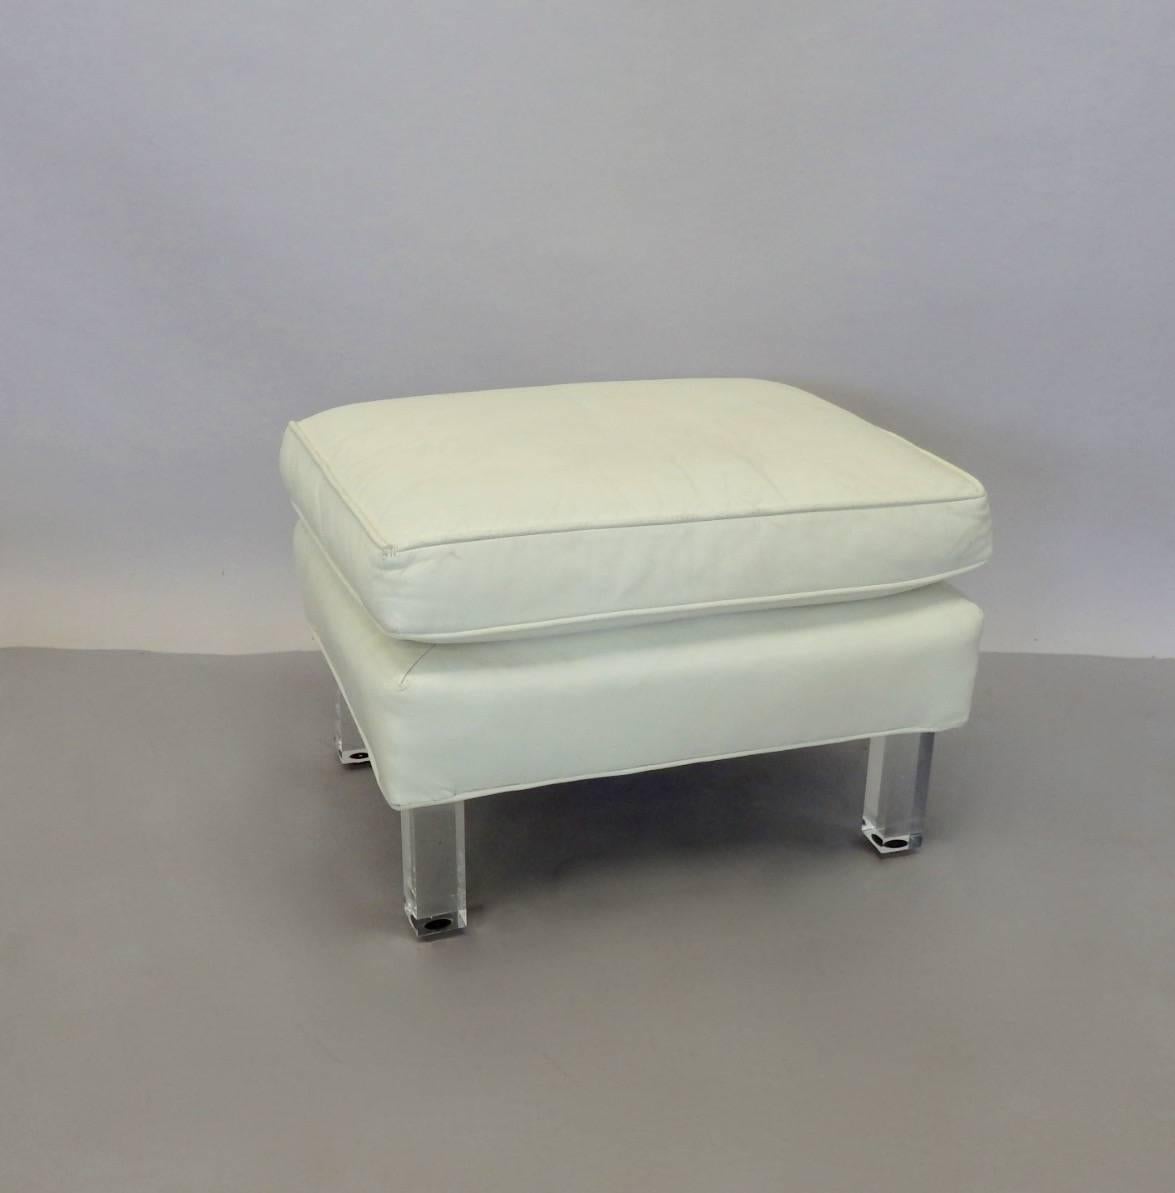 High style white leather ottoman on Lucite legs. Very well made. Leather shows patina more than age. Wrinkles in the original finish. Lucite also shows checking in the certain light.